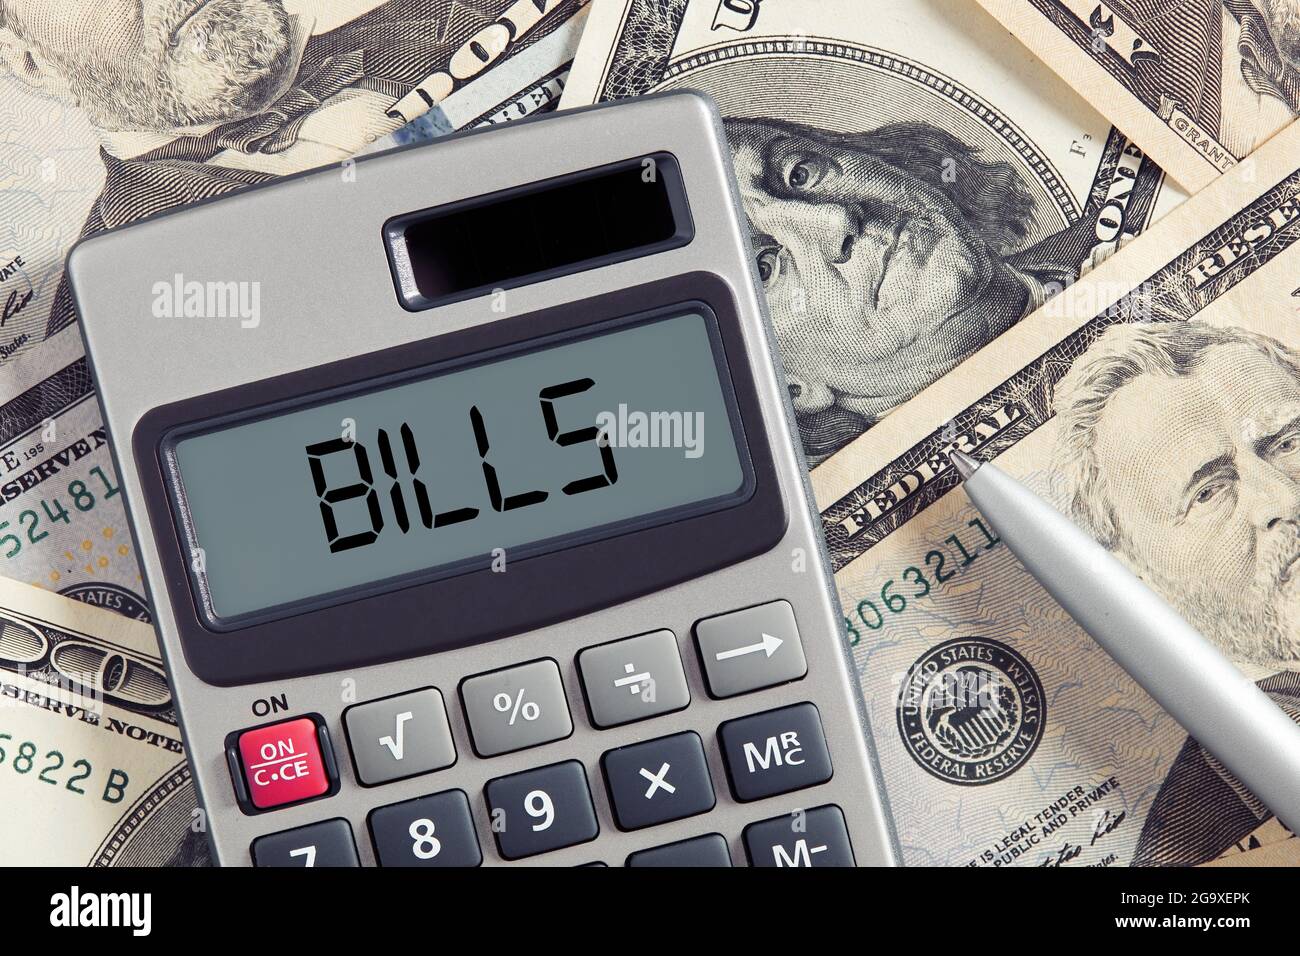 The word bills on calculator display with dollar bills background. Paying or calculating the bills concept. Stock Photo